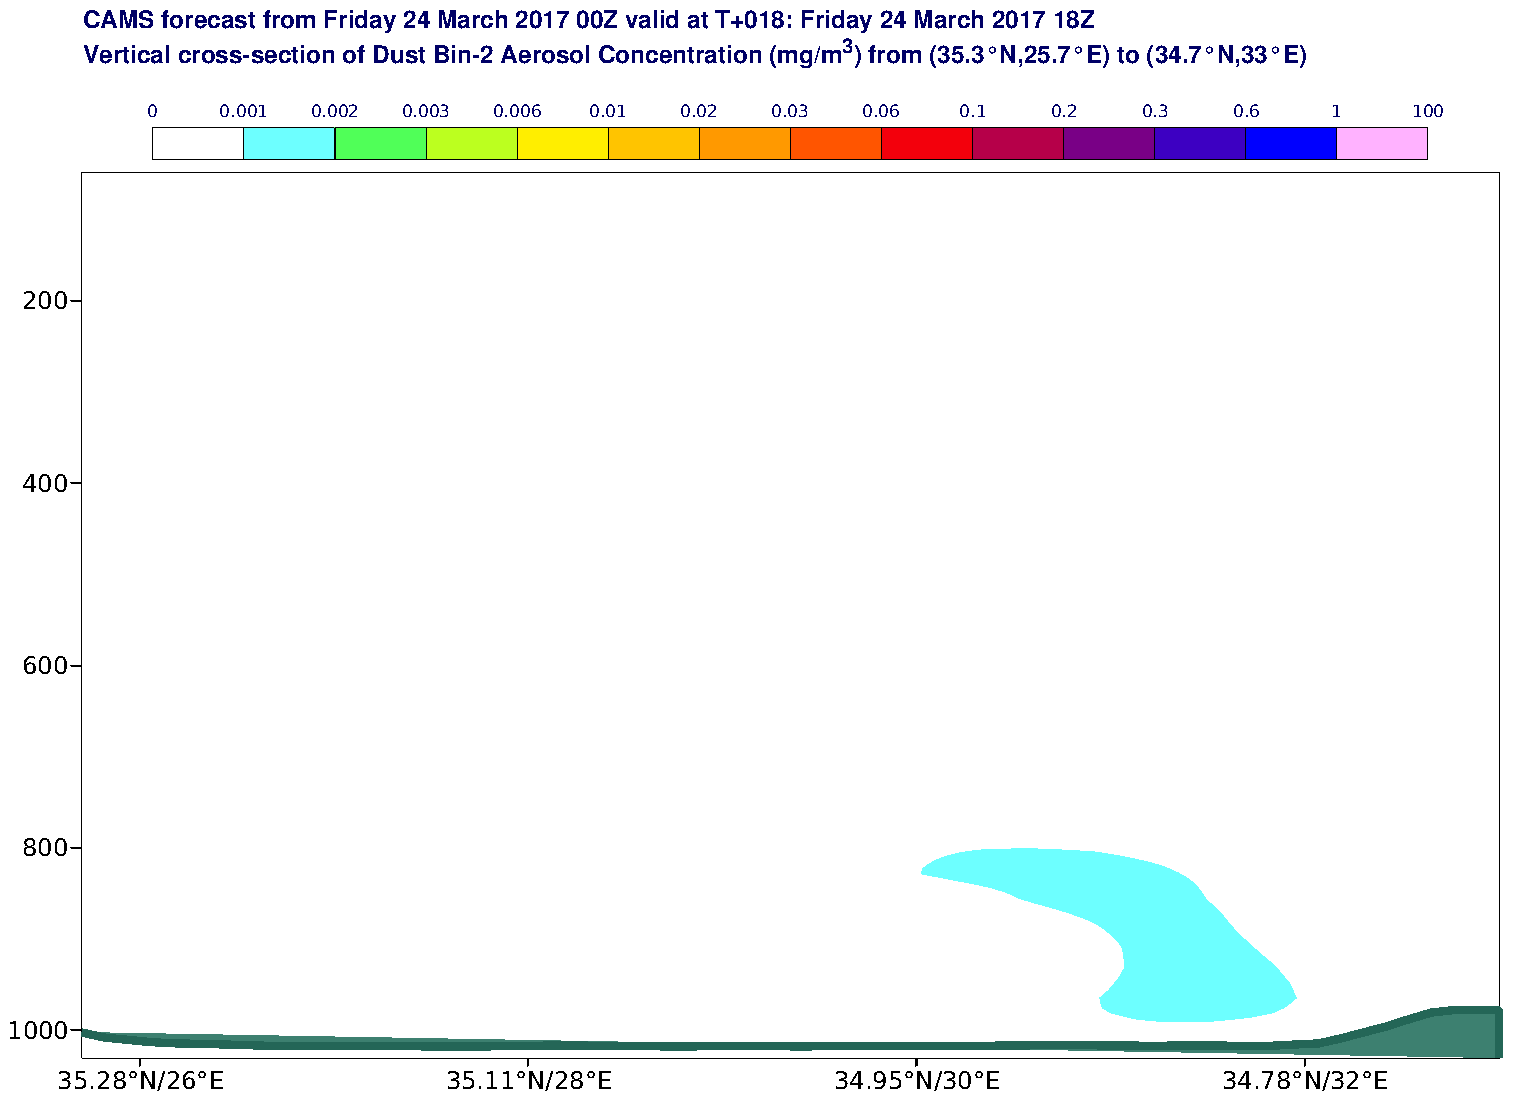 Vertical cross-section of Dust Bin-2 Aerosol Concentration (mg/m3) valid at T18 - 2017-03-24 18:00